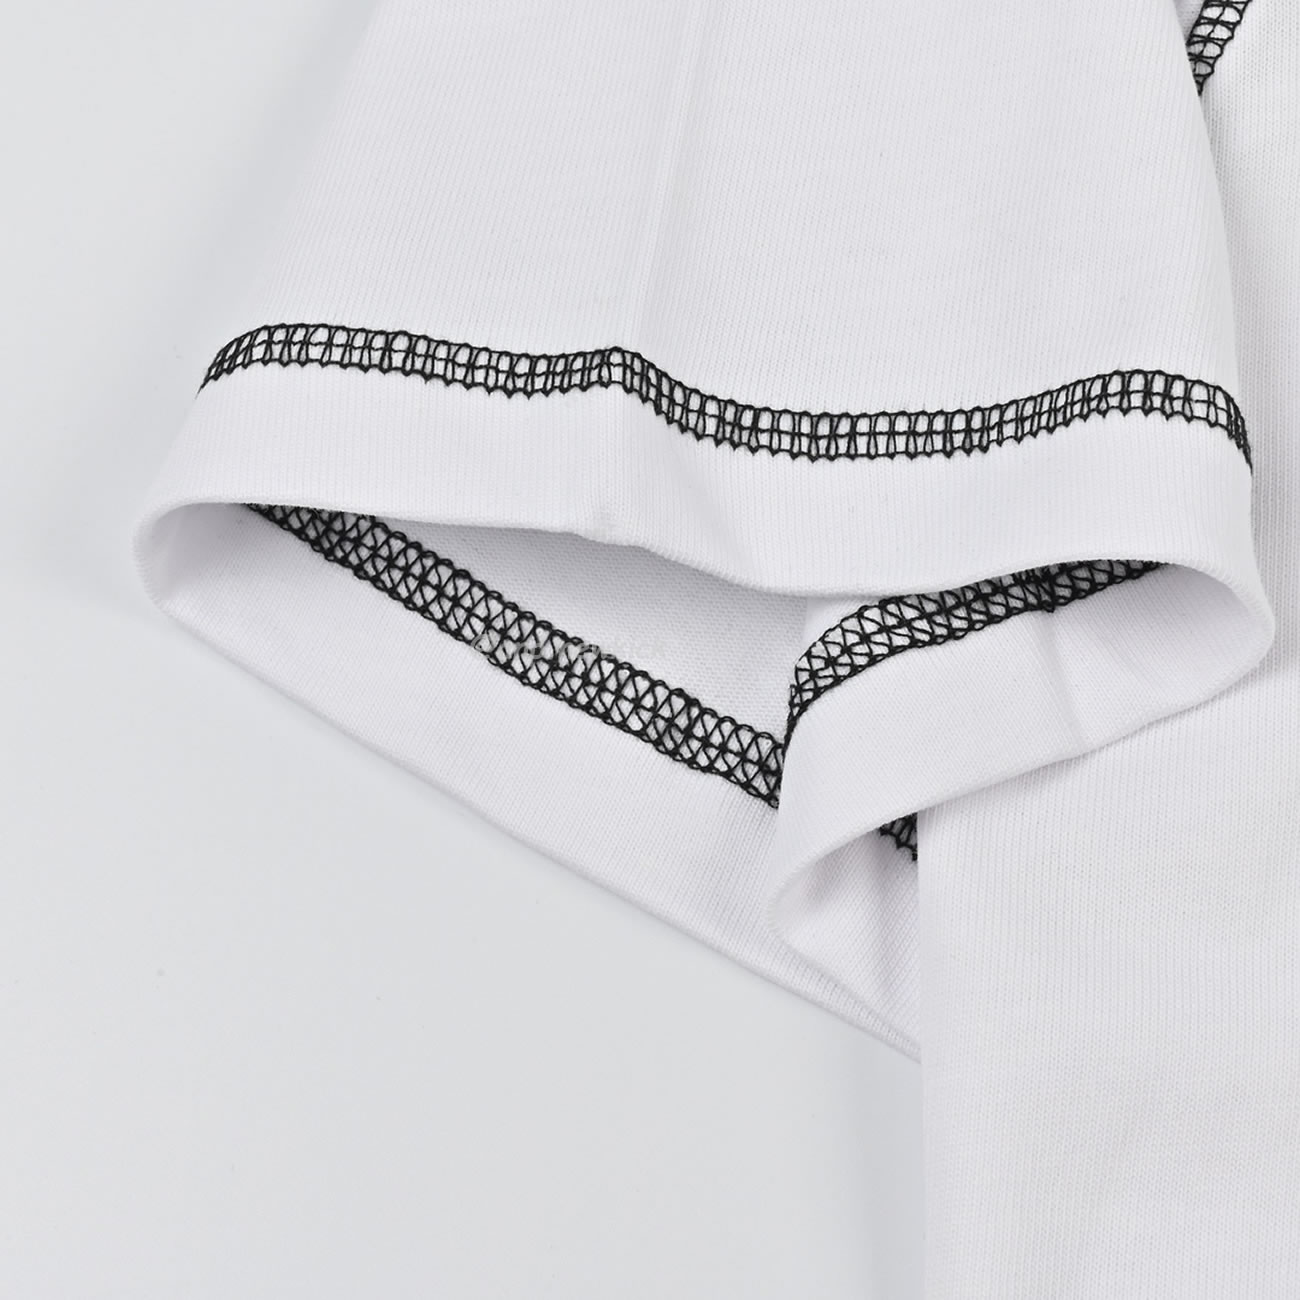 Louis Vuitton 24ss Stitching Cursive Embroidery Letters, Short Sleeves T Shirt (8) - newkick.org